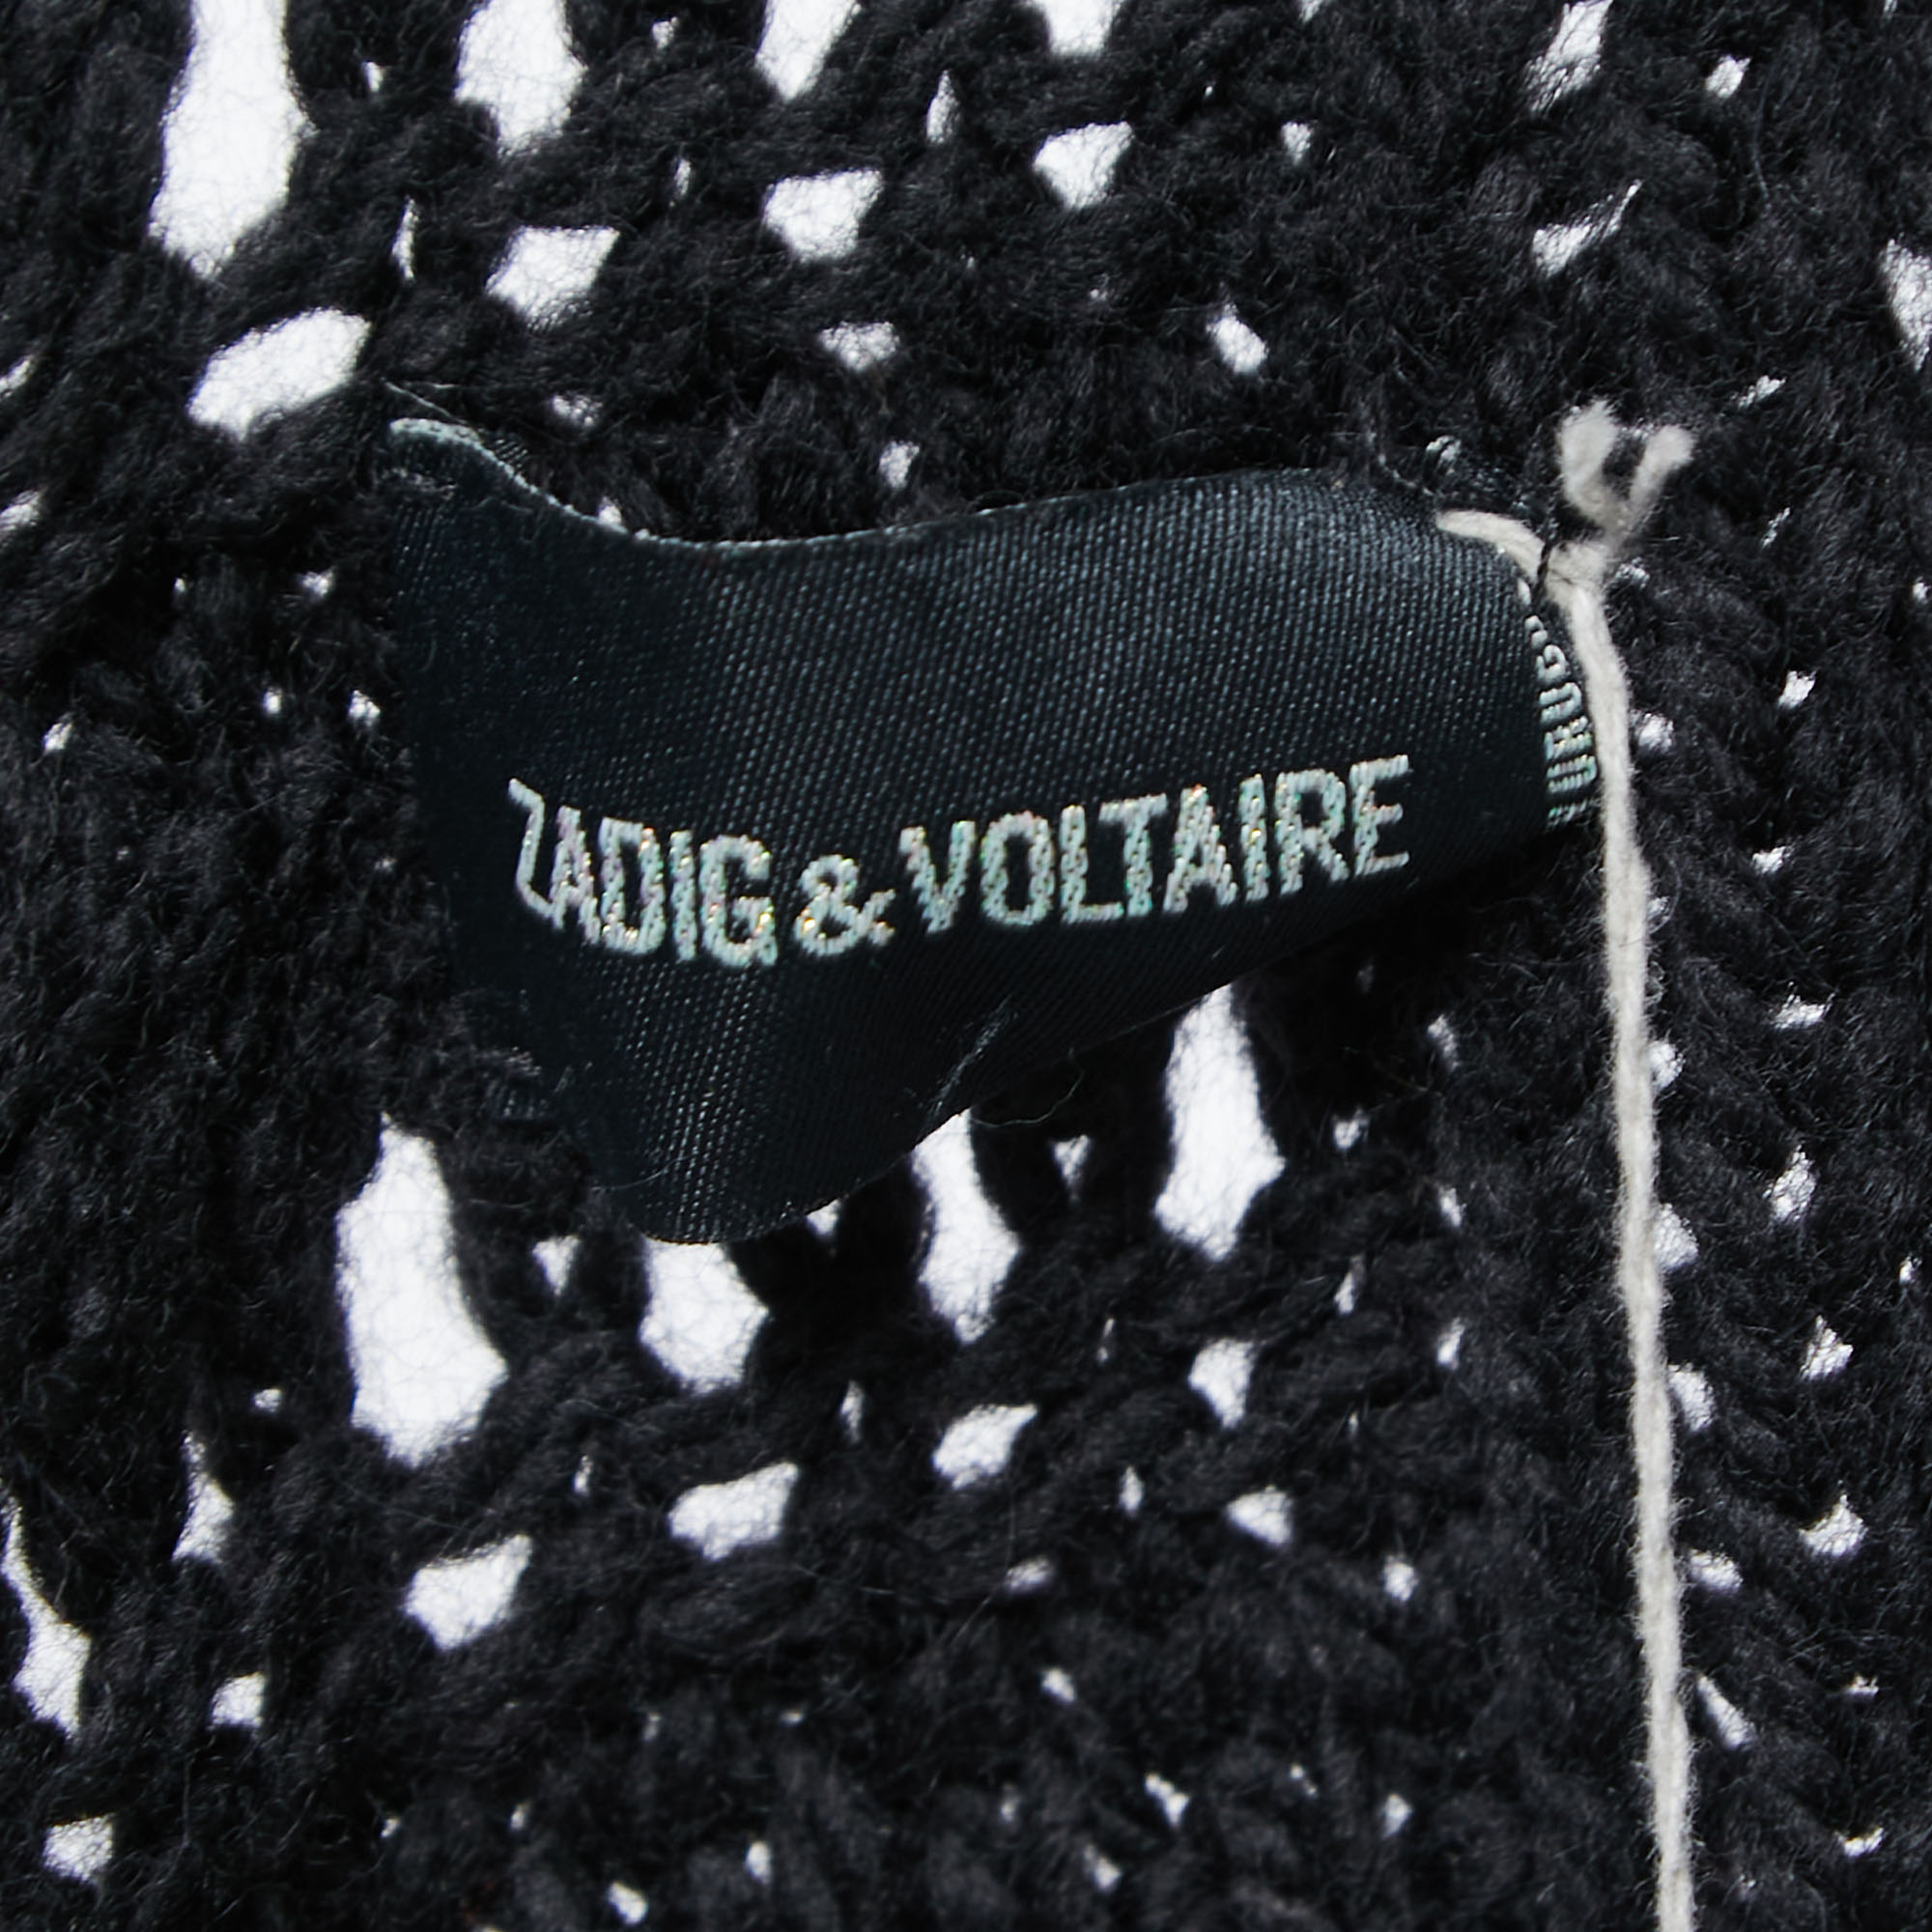 Zadig & Voltaire Black Wool Cable Knit Fringed Open Cardigan L